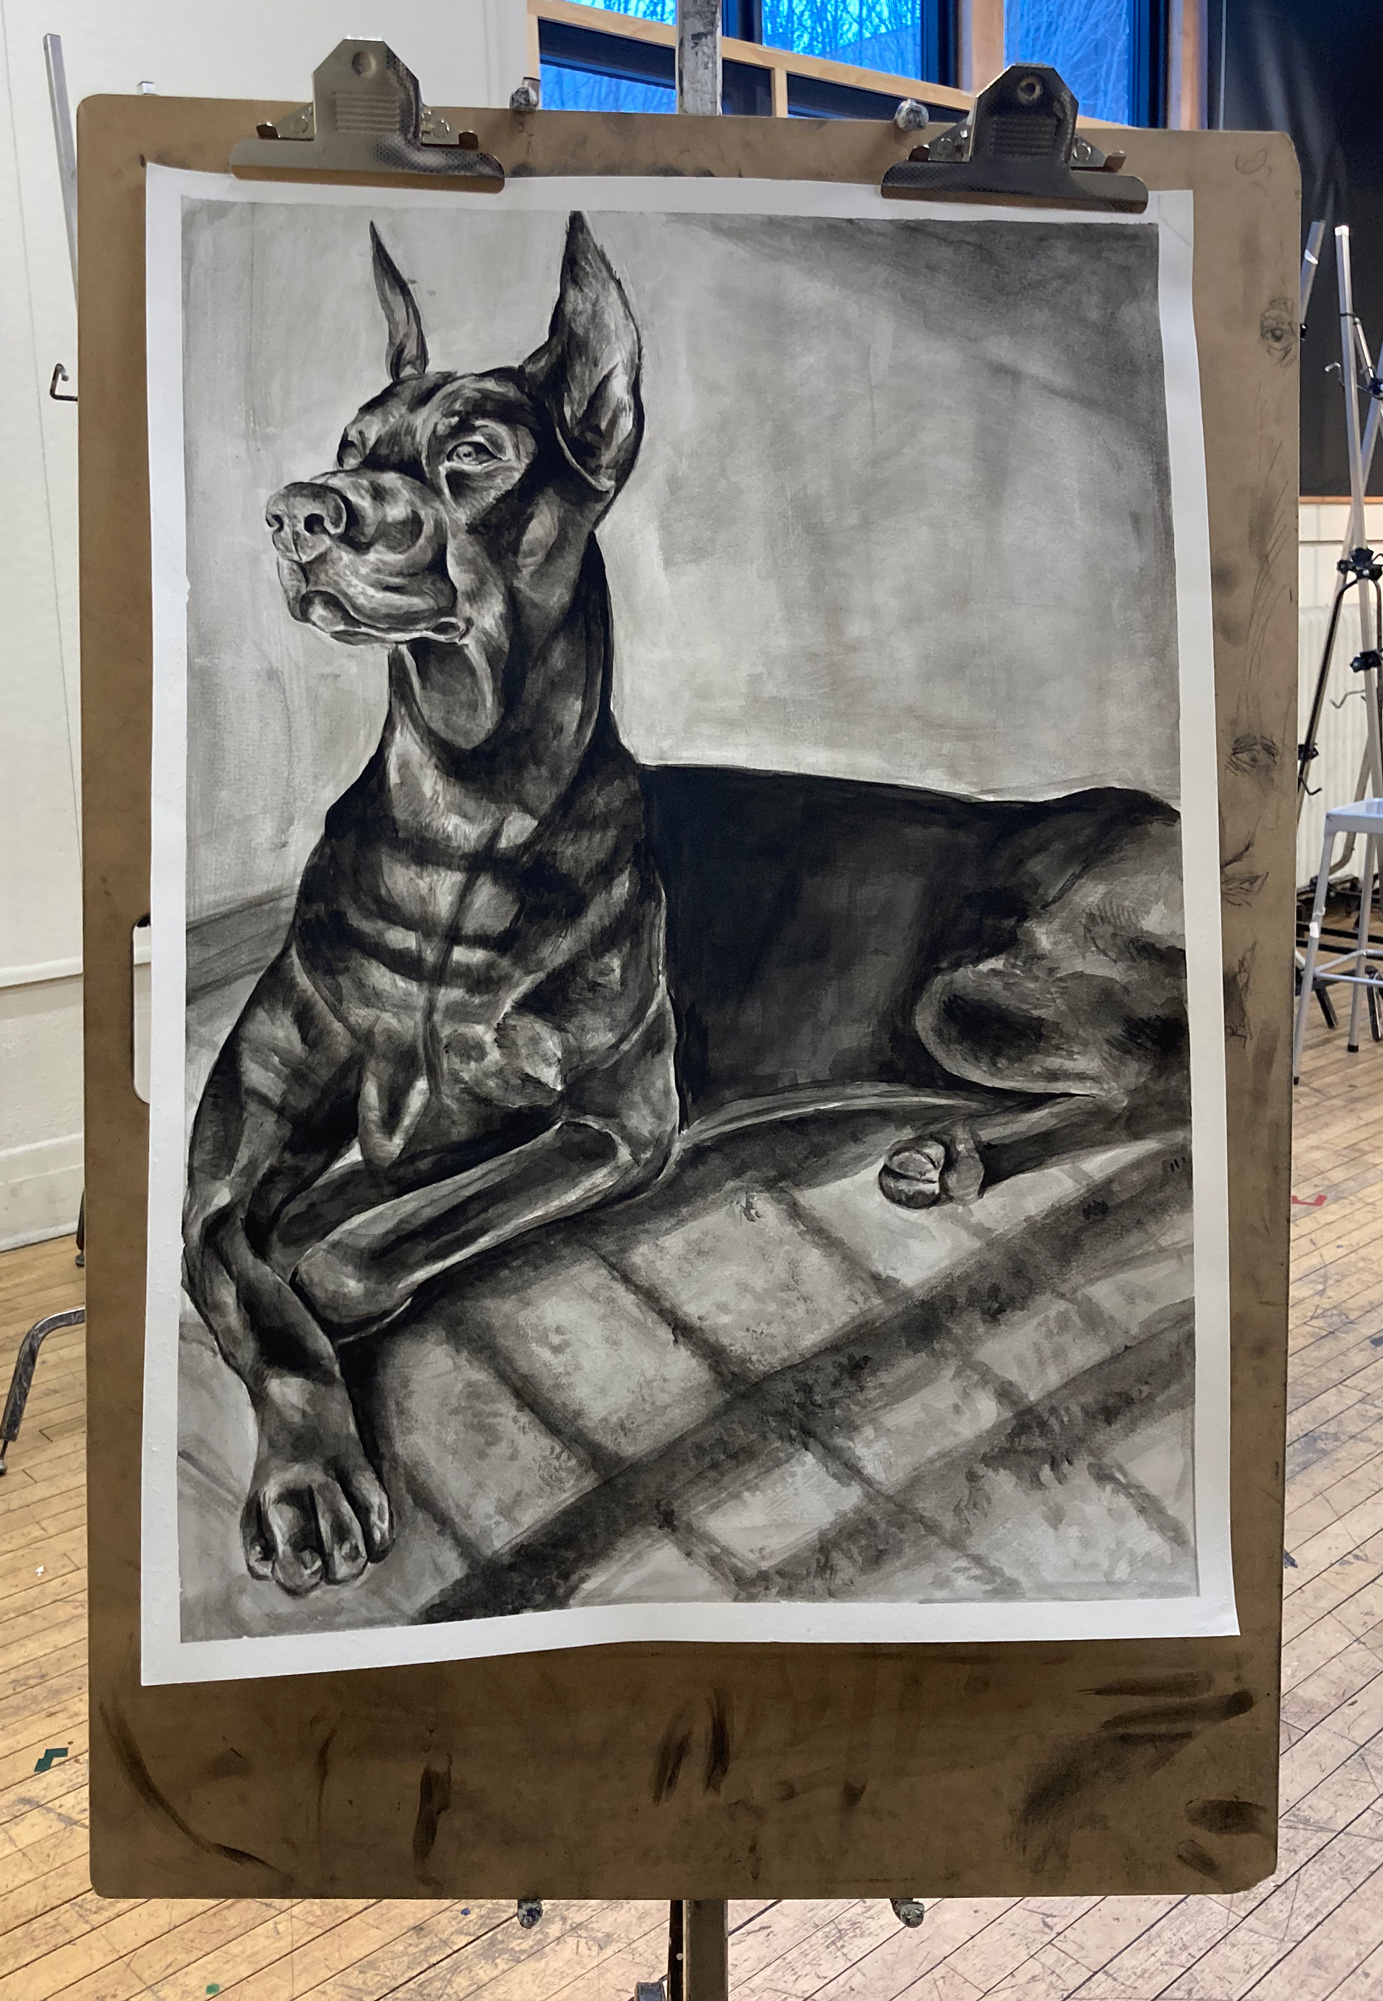 Drawing of a dog; breed appears to be a doberman